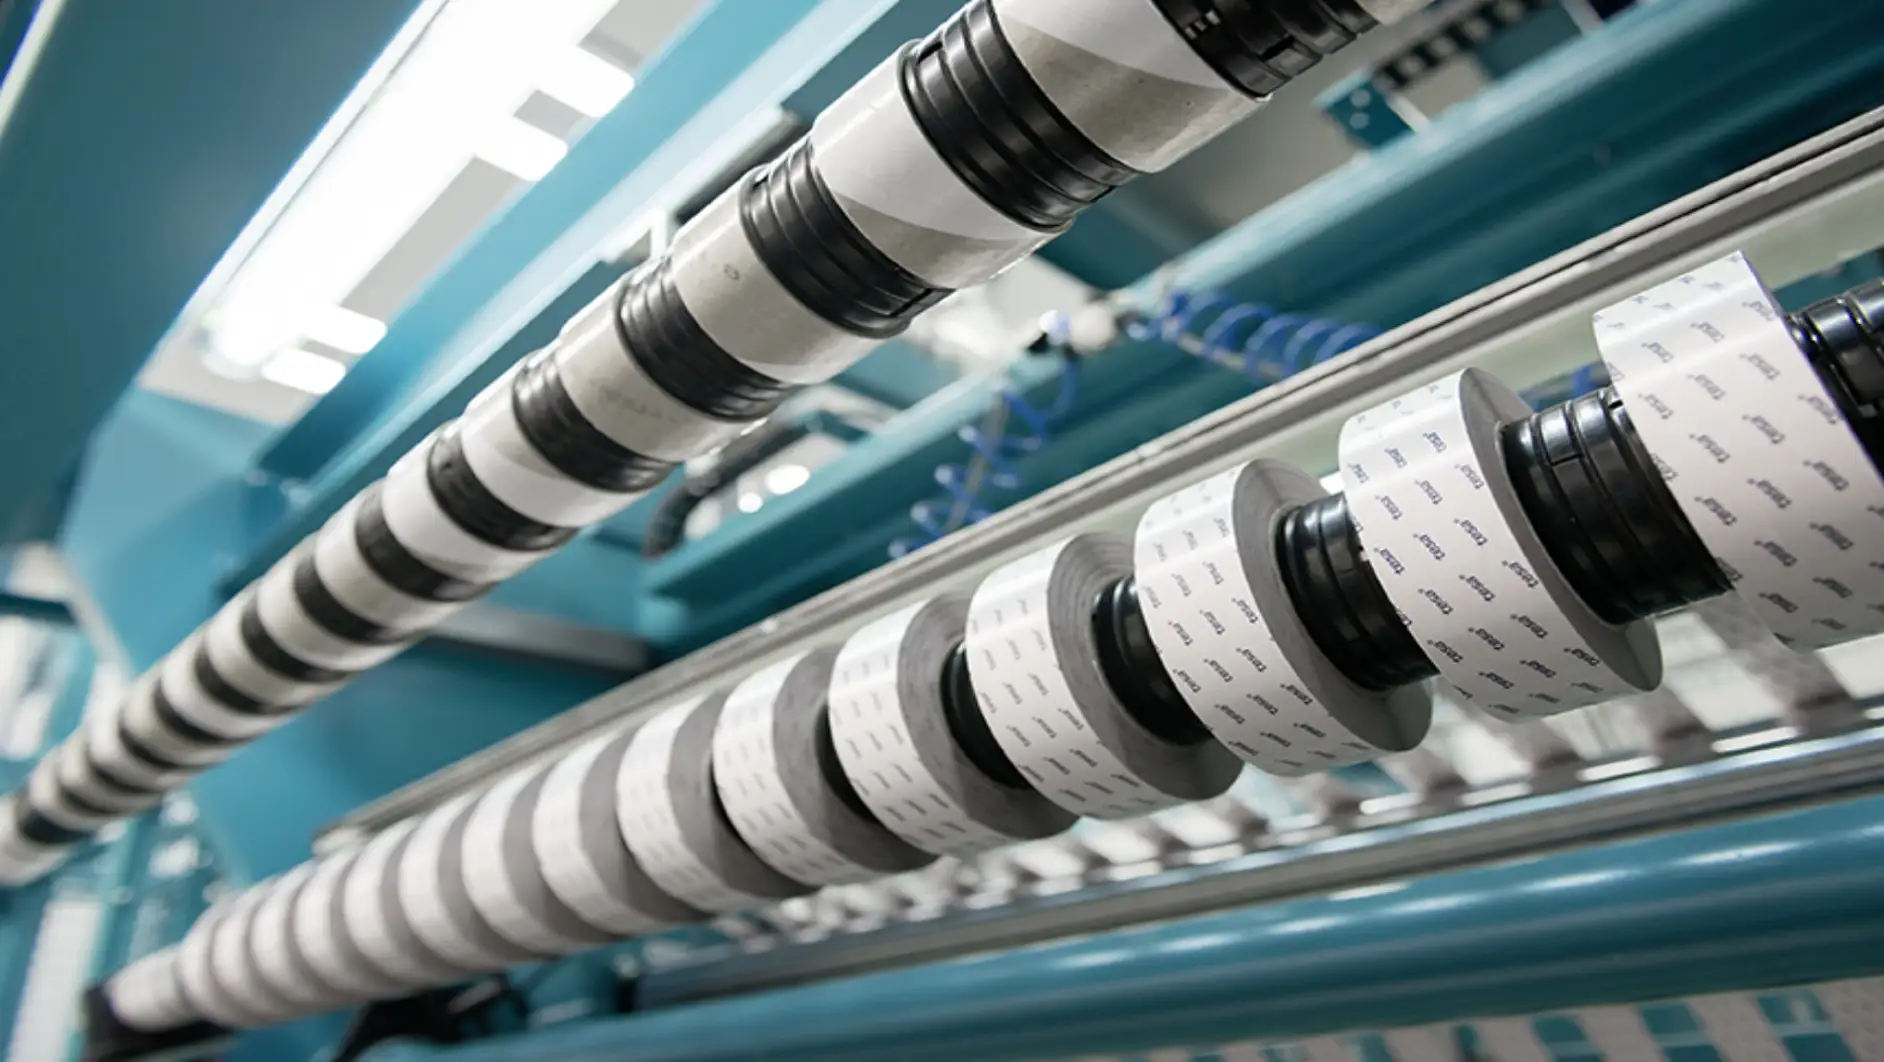 Double-sided adhesive tapes enable roll-to-roll flying splices in the paper industry. This allows manufacturers not only to save time, but also to reduce waste during production.